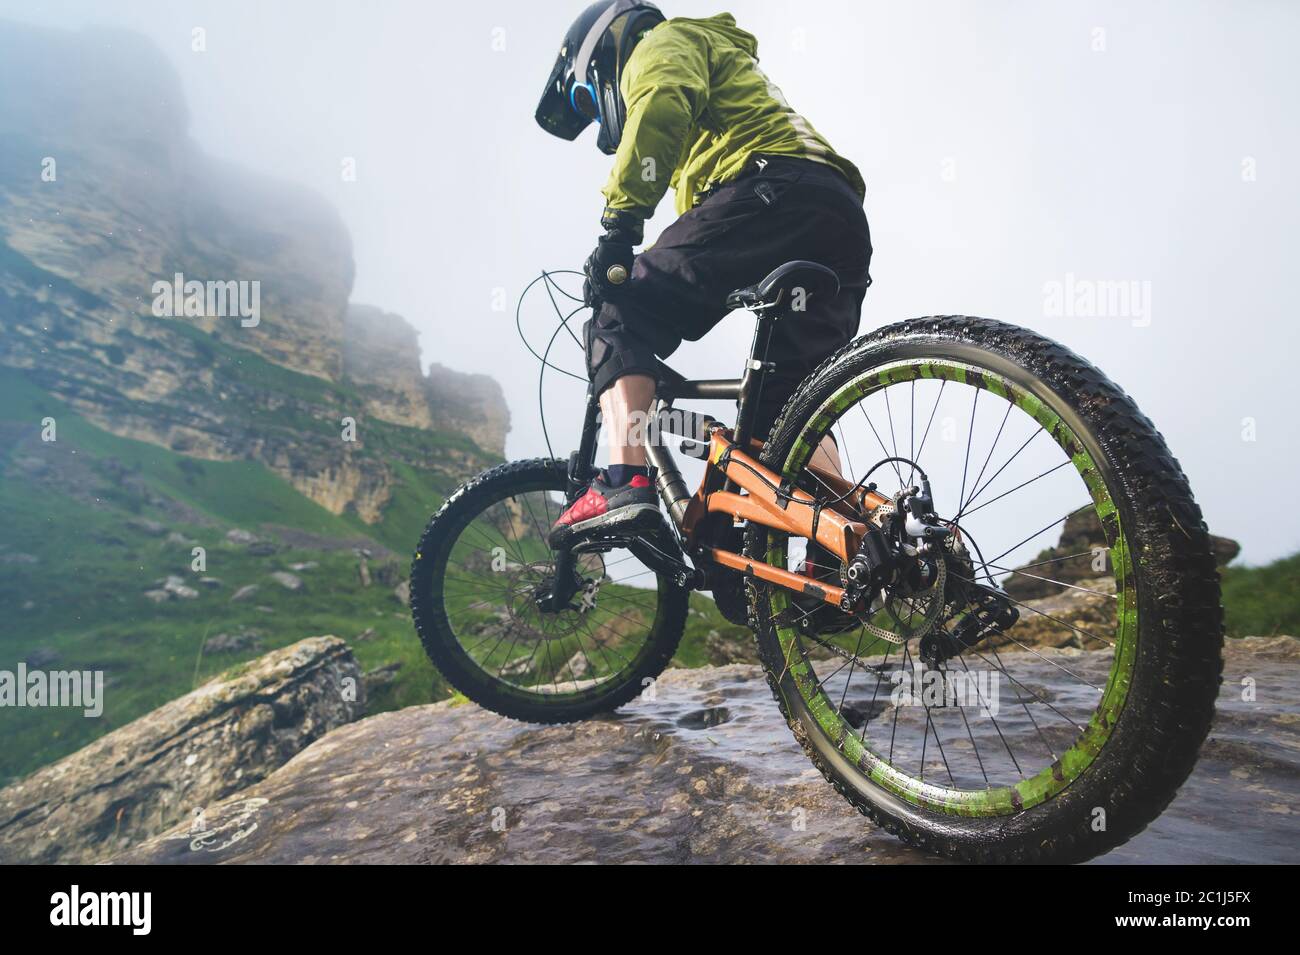 Legs of bicyclist and rear wheel close-up view of back mtb bike in mountains against background of rocks in foggy weather. The c Stock Photo